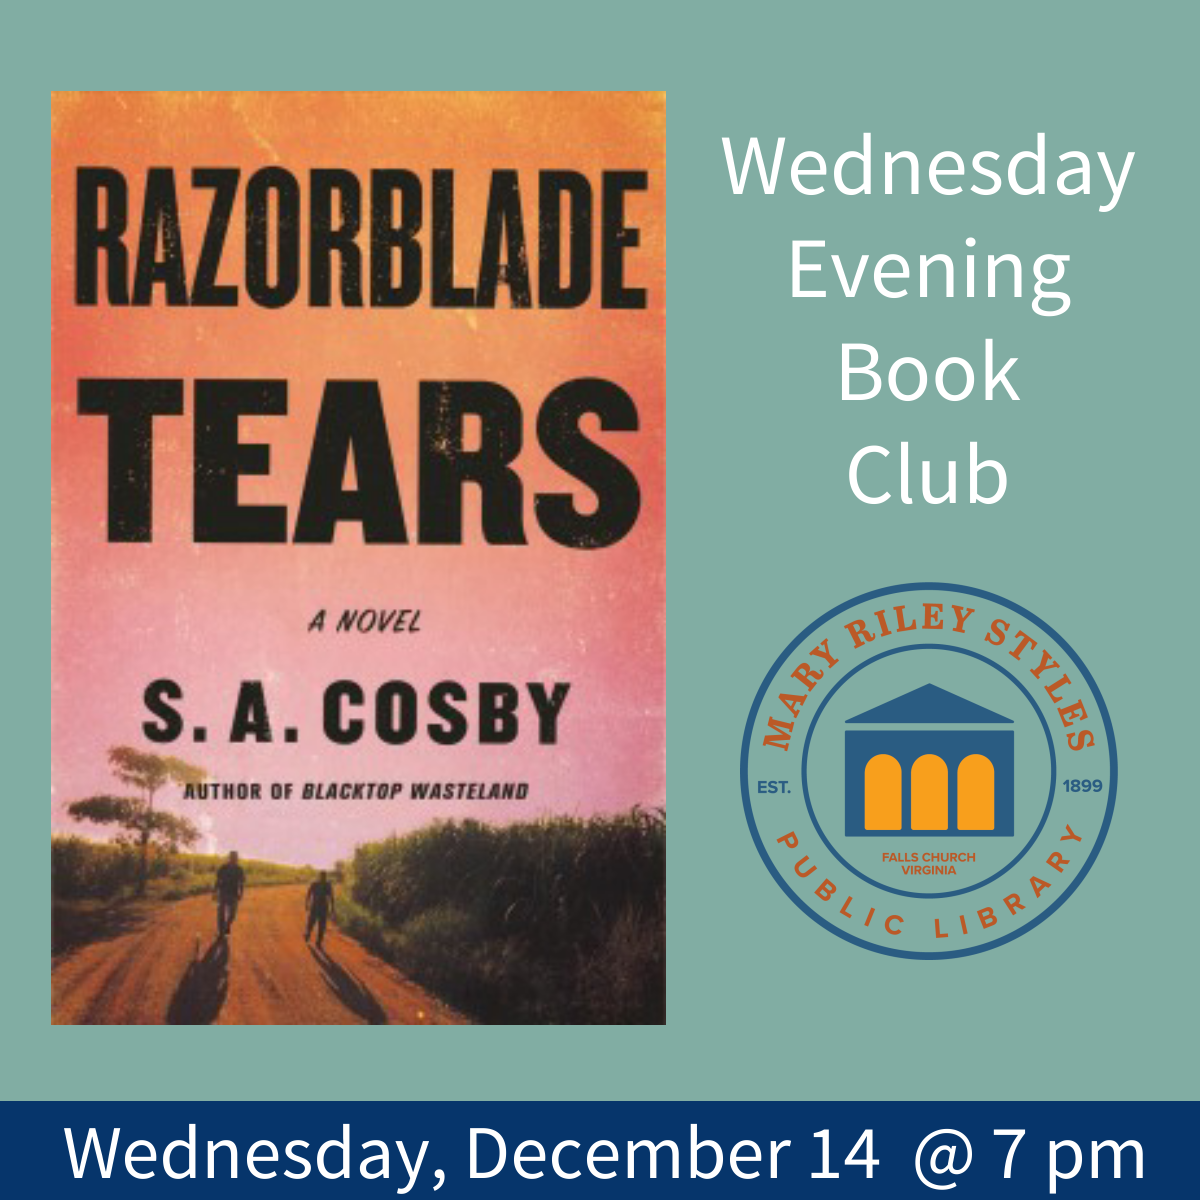 Wednesday Evening Book Club December 14 2022 at 7 pm Razorblade Tears by SA Cosby